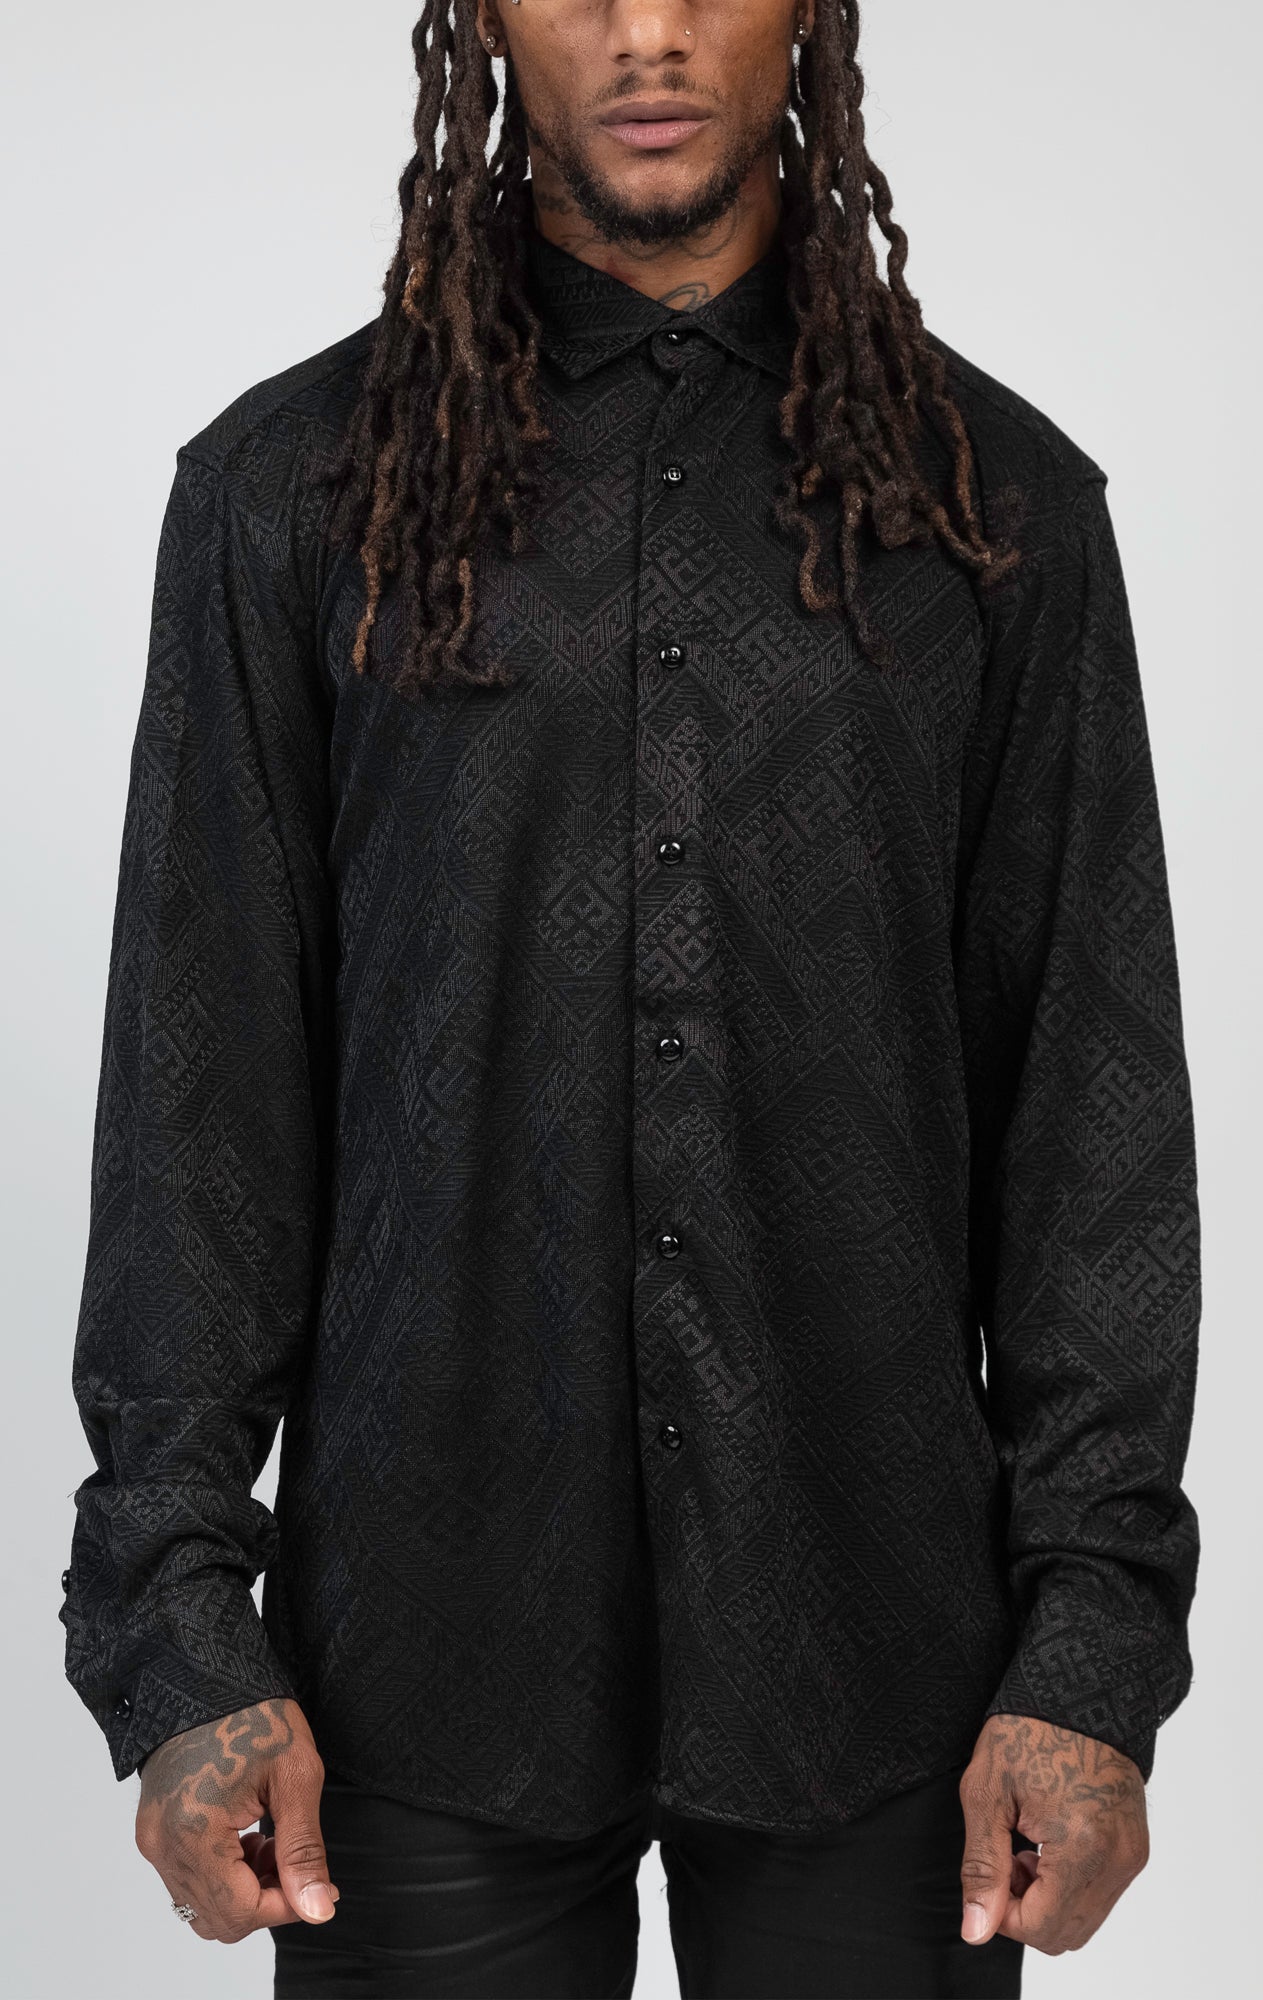 Black stylish and comfortable slim-fit long-sleeve shirt featuring a soft and breathable fabric, an eye-catching all-over seamless pattern, and a versatile design.